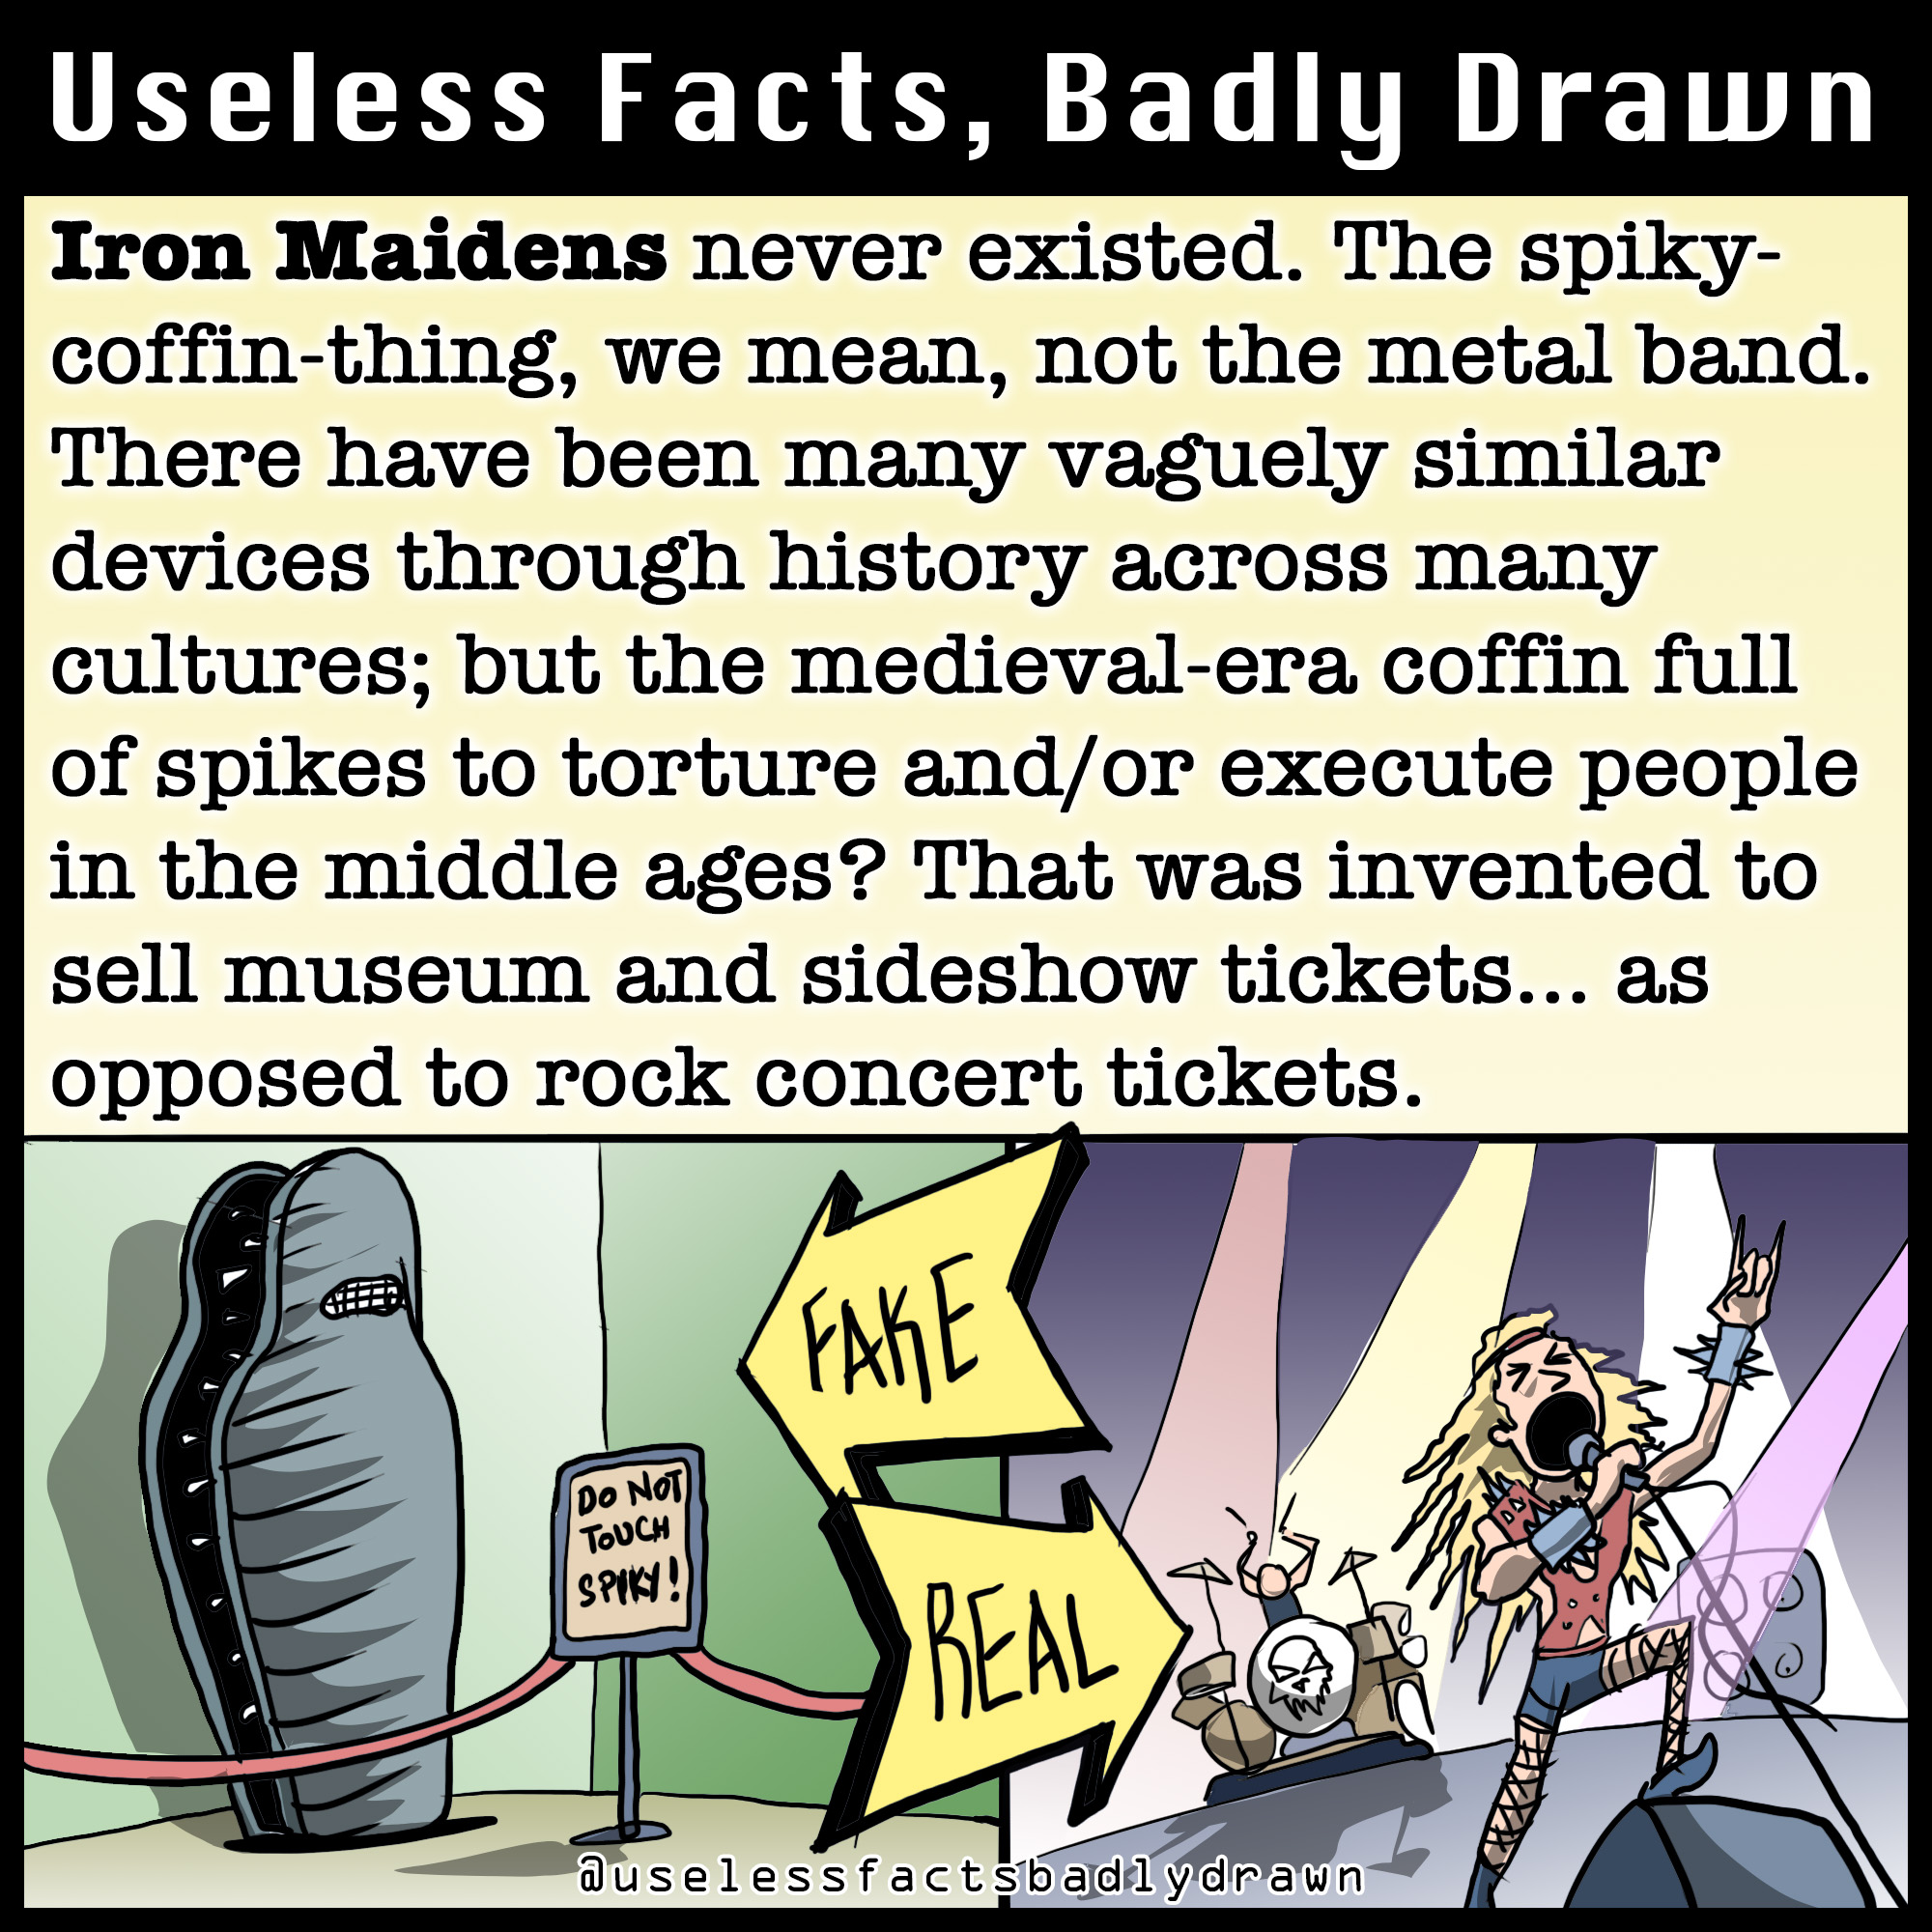 quotes - Useless Facts, Badly Drawn Iron Maidens never existed. The spiky coffinthing, we mean, not the metal band. There have been many vaguely similar devices through history across many cultures; but the medievalera coffin full of spikes to torture and